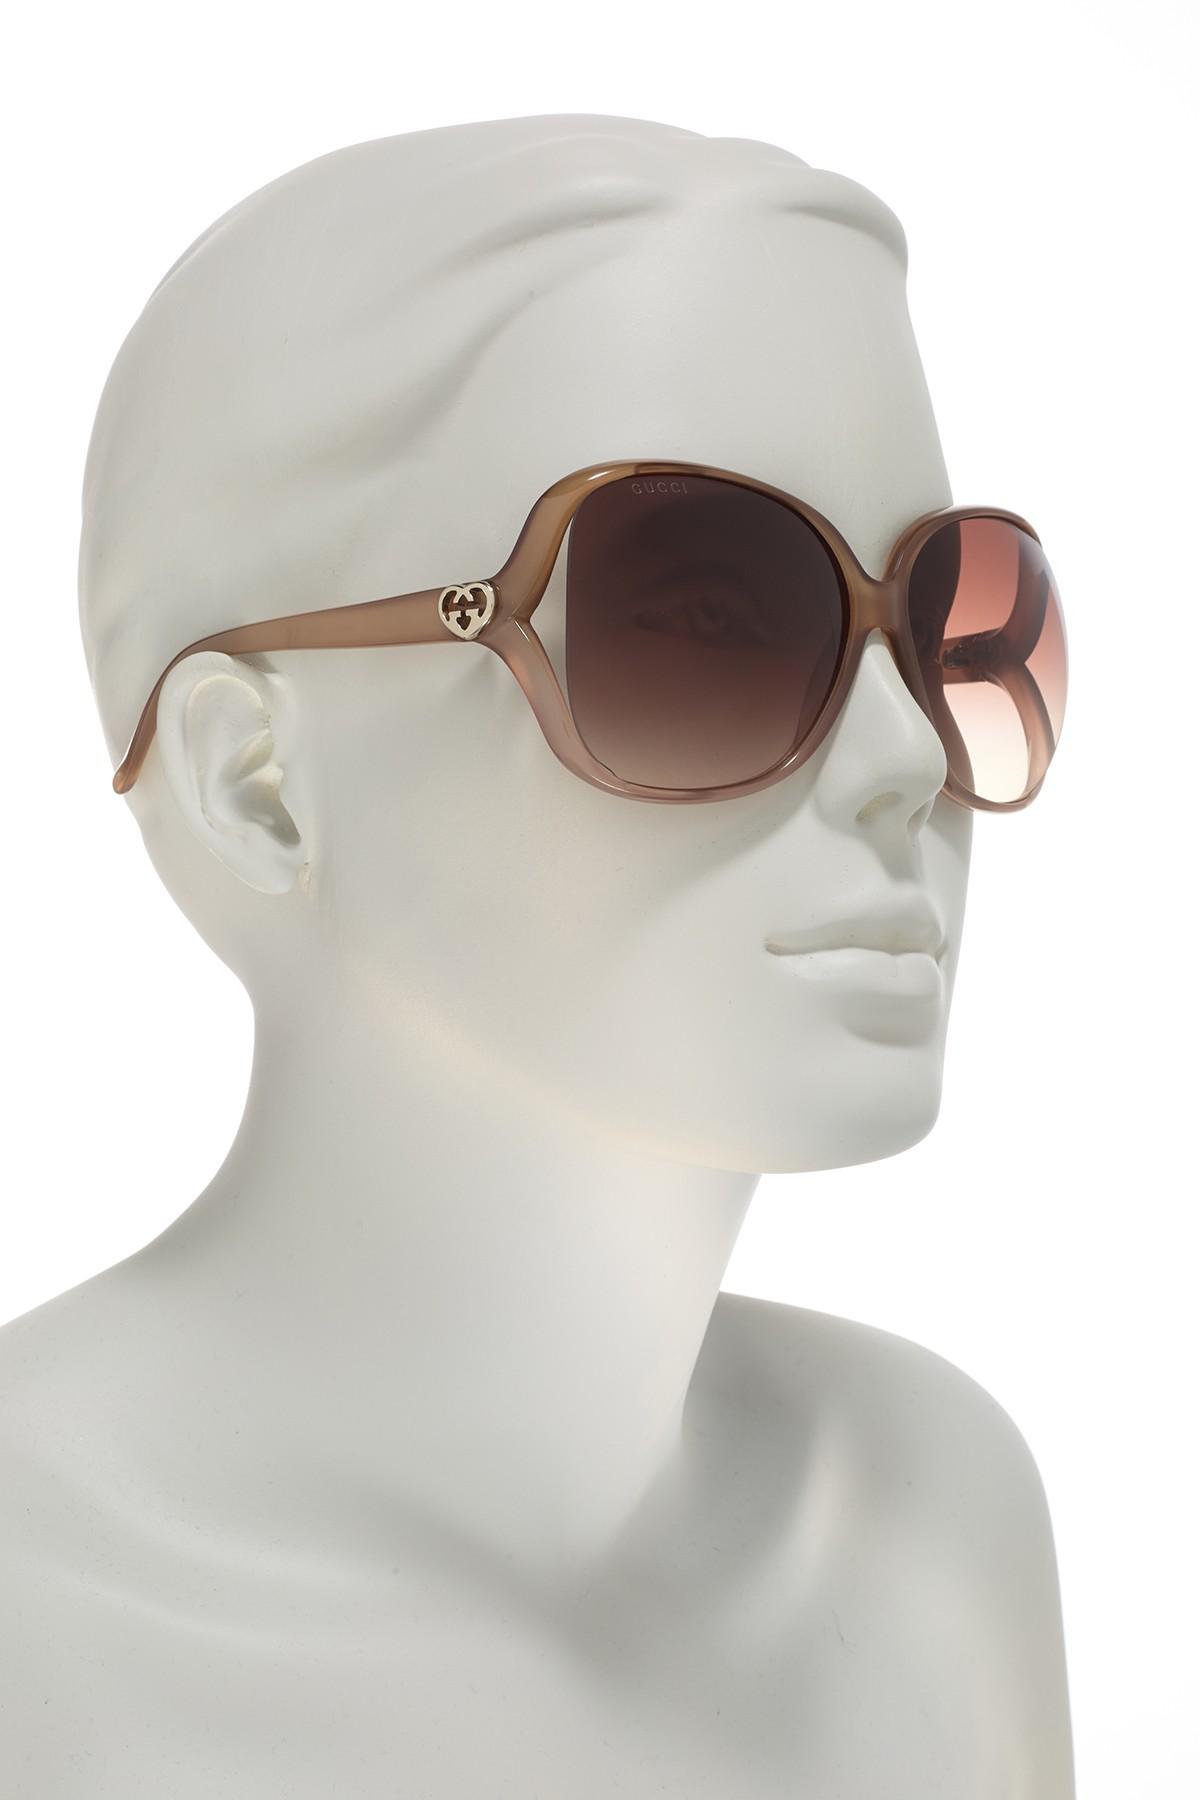 Gucci 60mm Oversized Square Sunglasses in Beige Brown (Brown) - Lyst